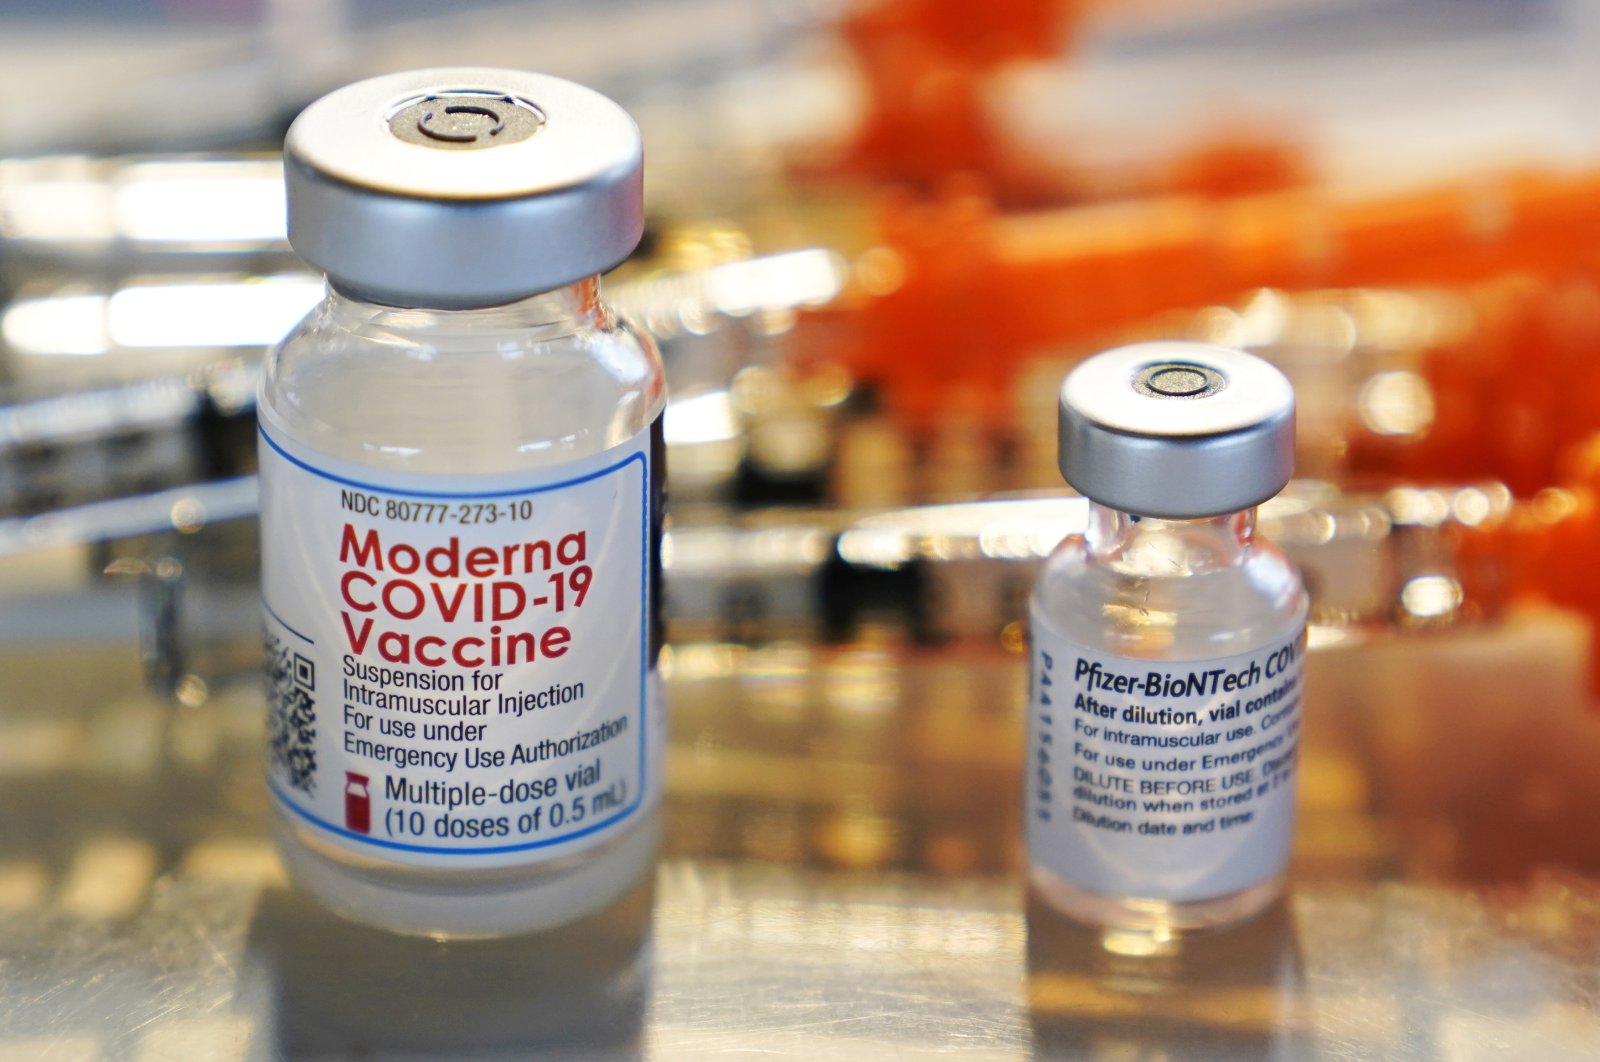 Vials for the Moderna and Pfizer COVID-19 vaccines can be seen at a temporary clinic in Exeter, New Hampshire, U.S., Feb. 25, 2021. (AP Photo)